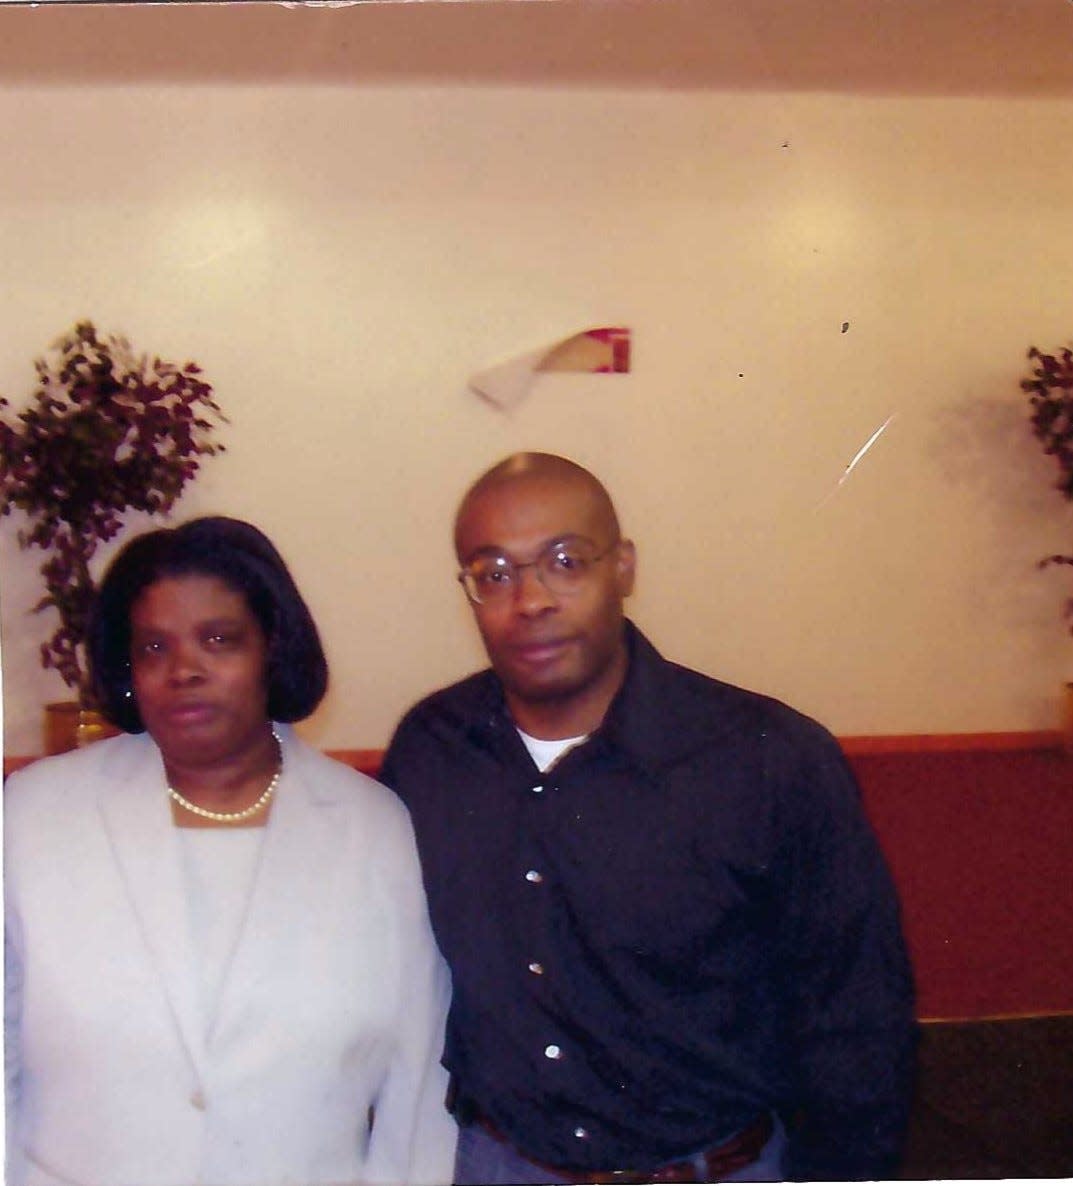 Denise Holcomb, left, and her son, Derrick Cummings, in 2002. Derrick died by suicide on Aug. 8, 2003, less than three weeks shy of his 31st birthday.